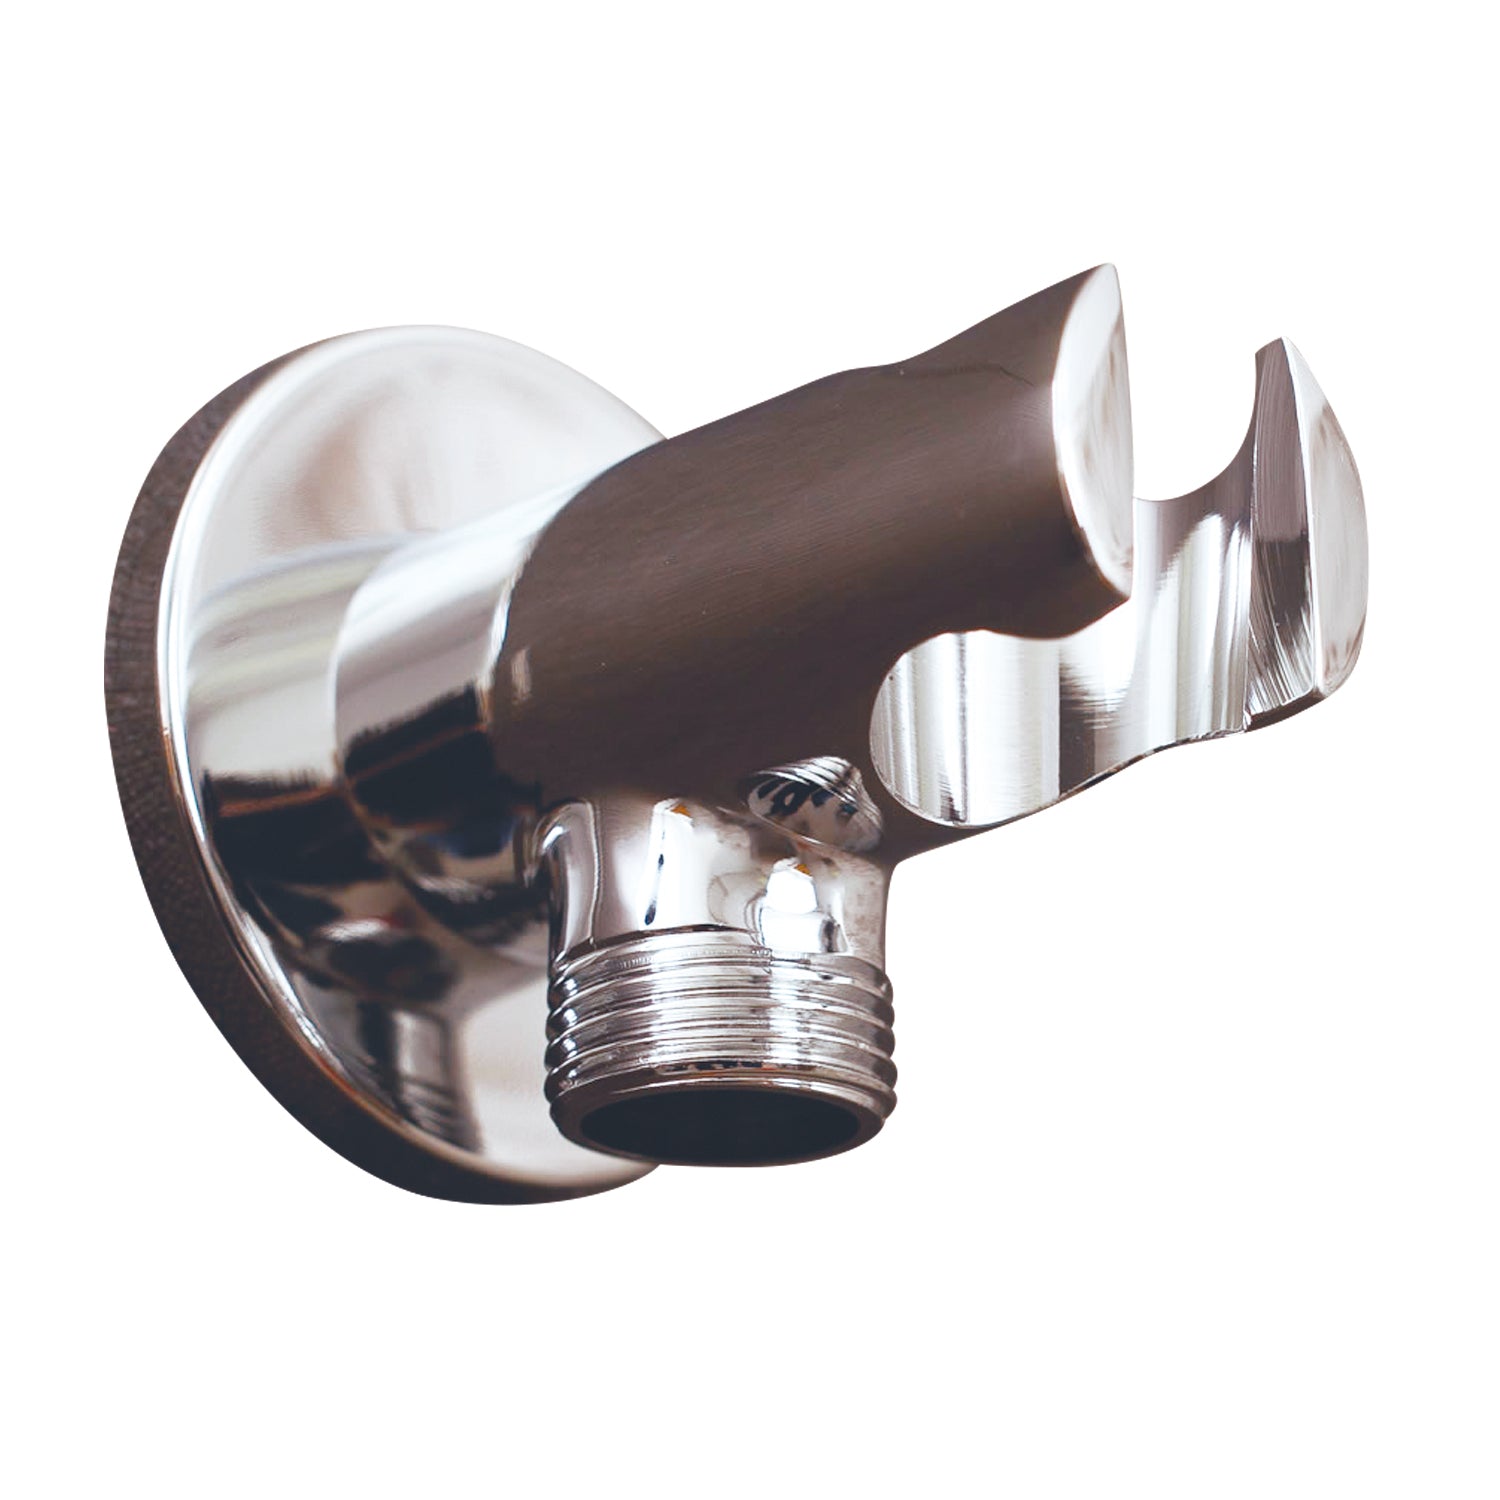 DAX Hand Held Shower Holder, Round Line, Brass Body, Wall Mount , Chrome Finish, 2-1/4 x 1 x 2-1/2 inches (D-B52-CR)